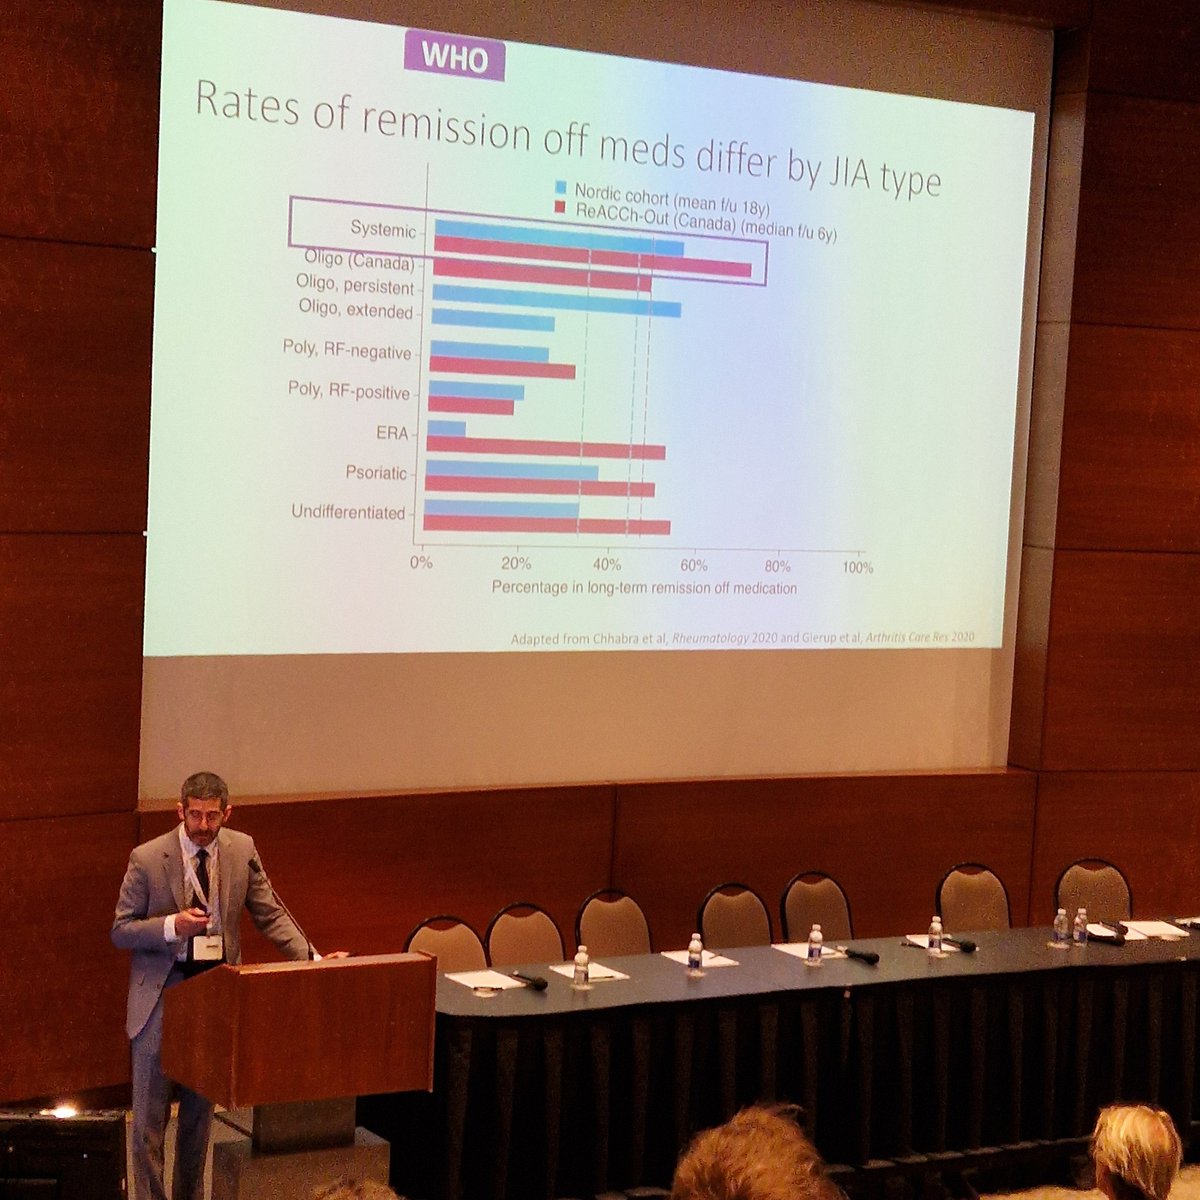 JIA subtype is a predictor of flare off medication with sJIA most likely to remain in unmedicated remission and RF positive poly-JIA least likely to remain flare-free when off medication. Daniel Horton speaking at @cabc2024 #cabc24 #cabc2024 @ucancandu